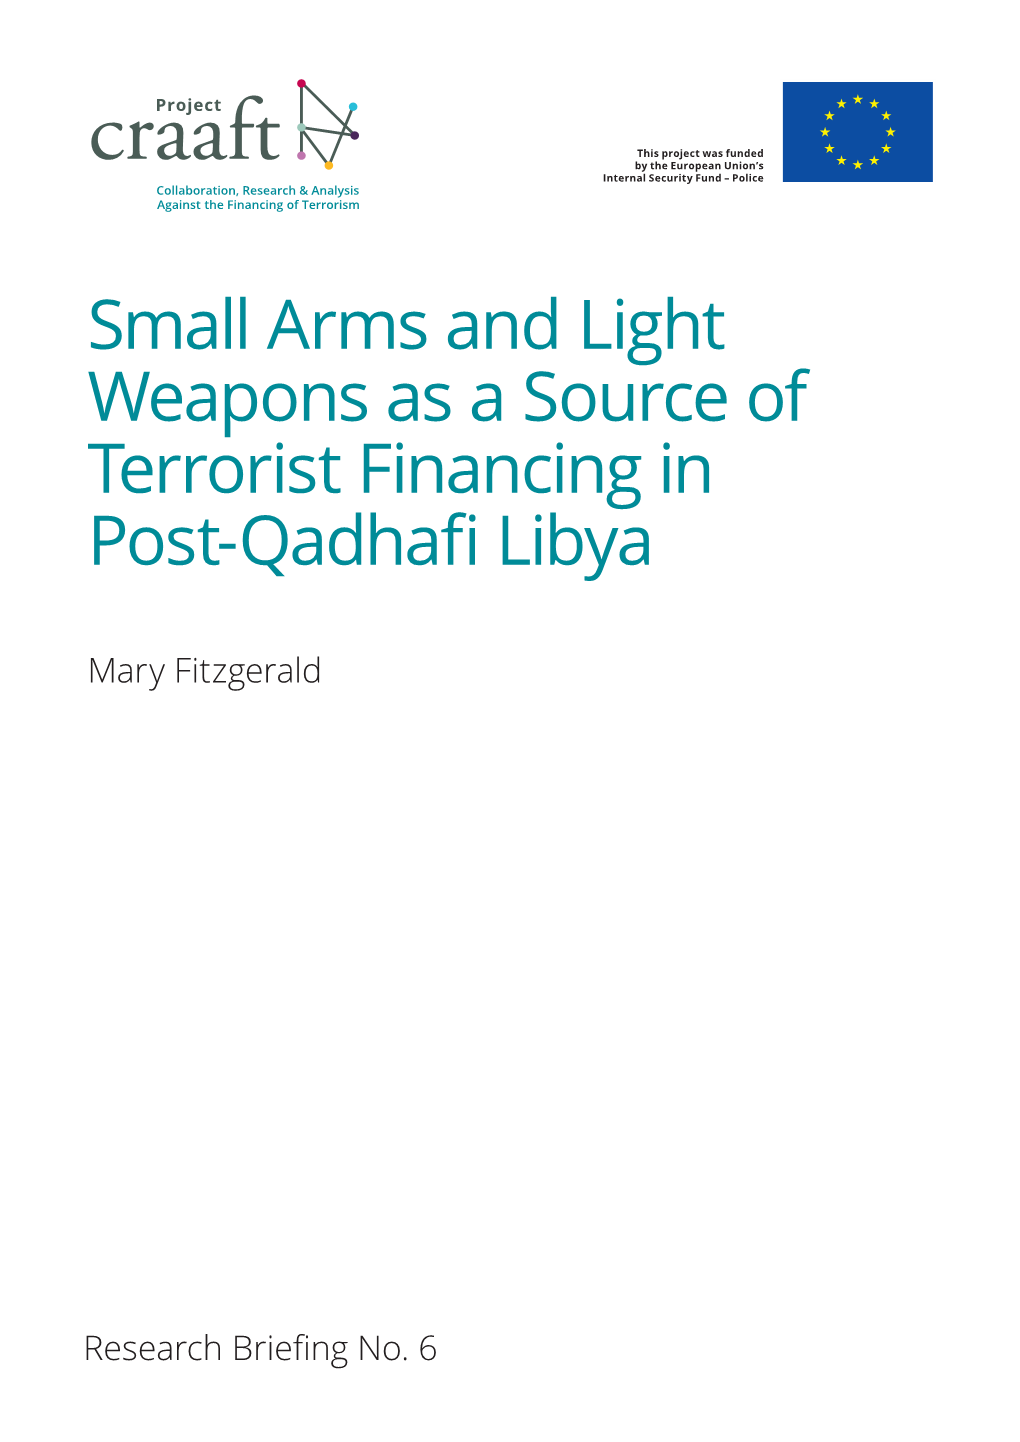 Small Arms and Light Weapons As a Source of Terrorist Financing in Post-Qadhafi Libya